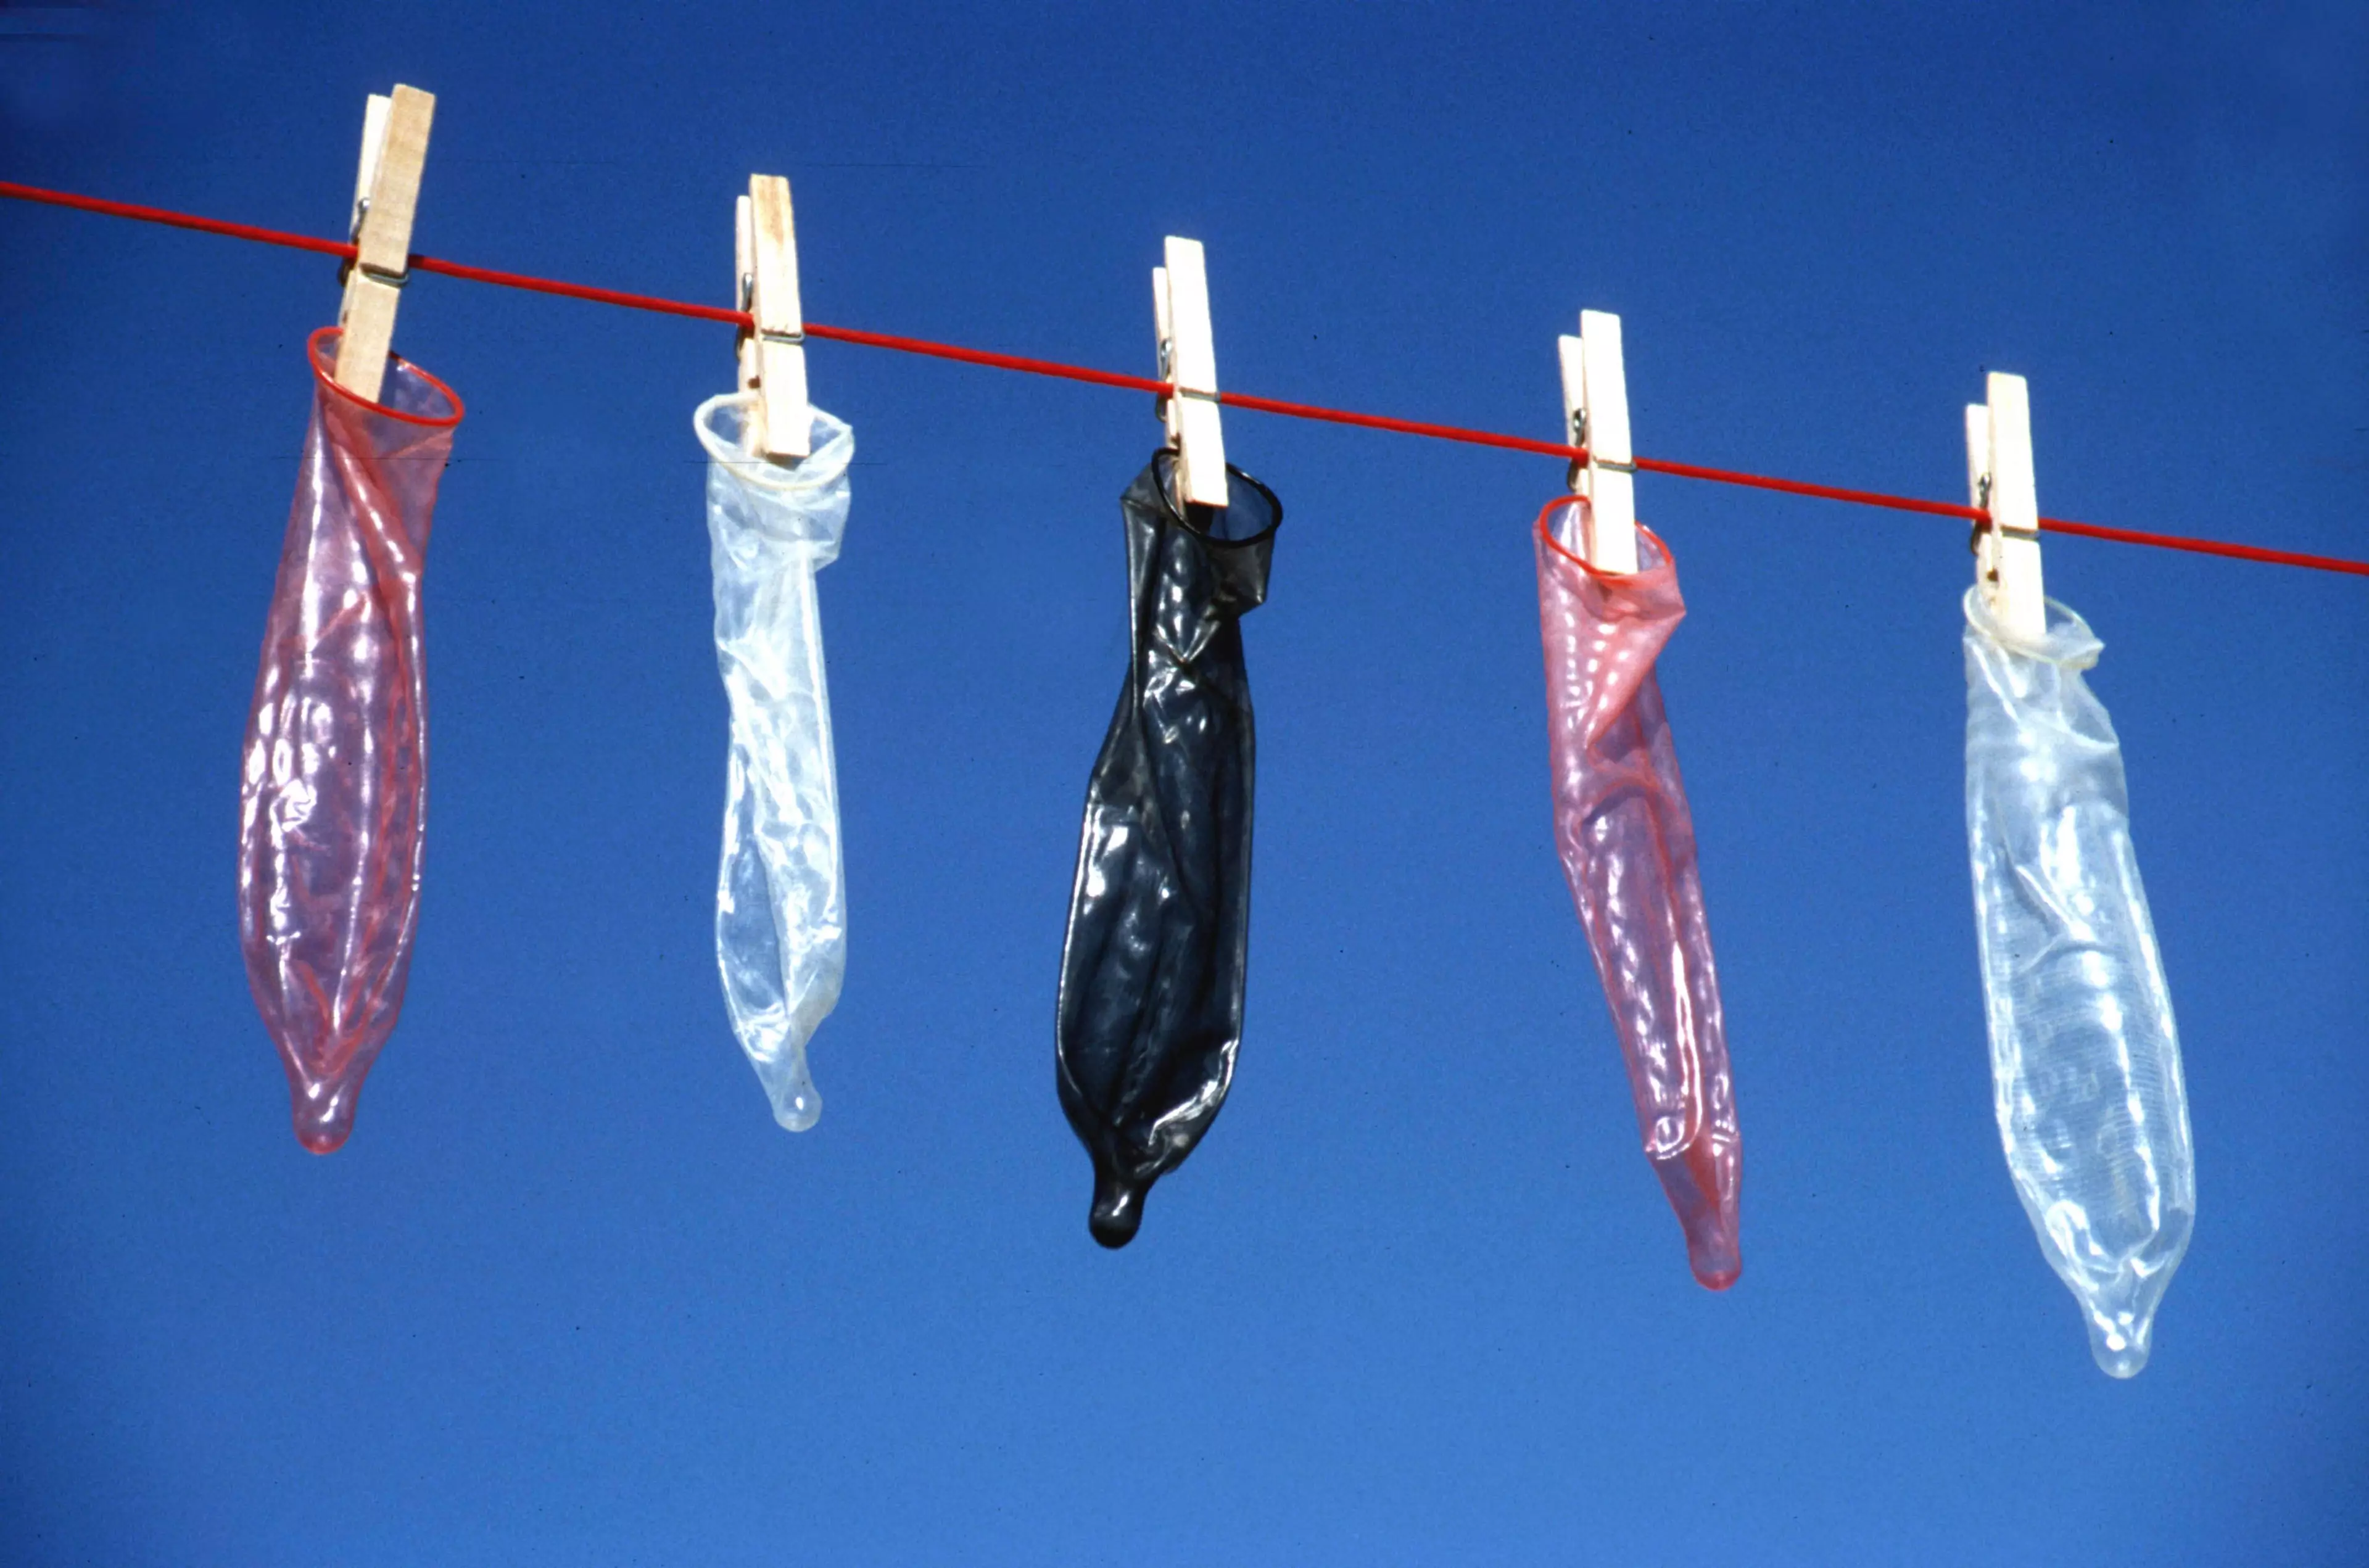 The condoms were being washed and dried.